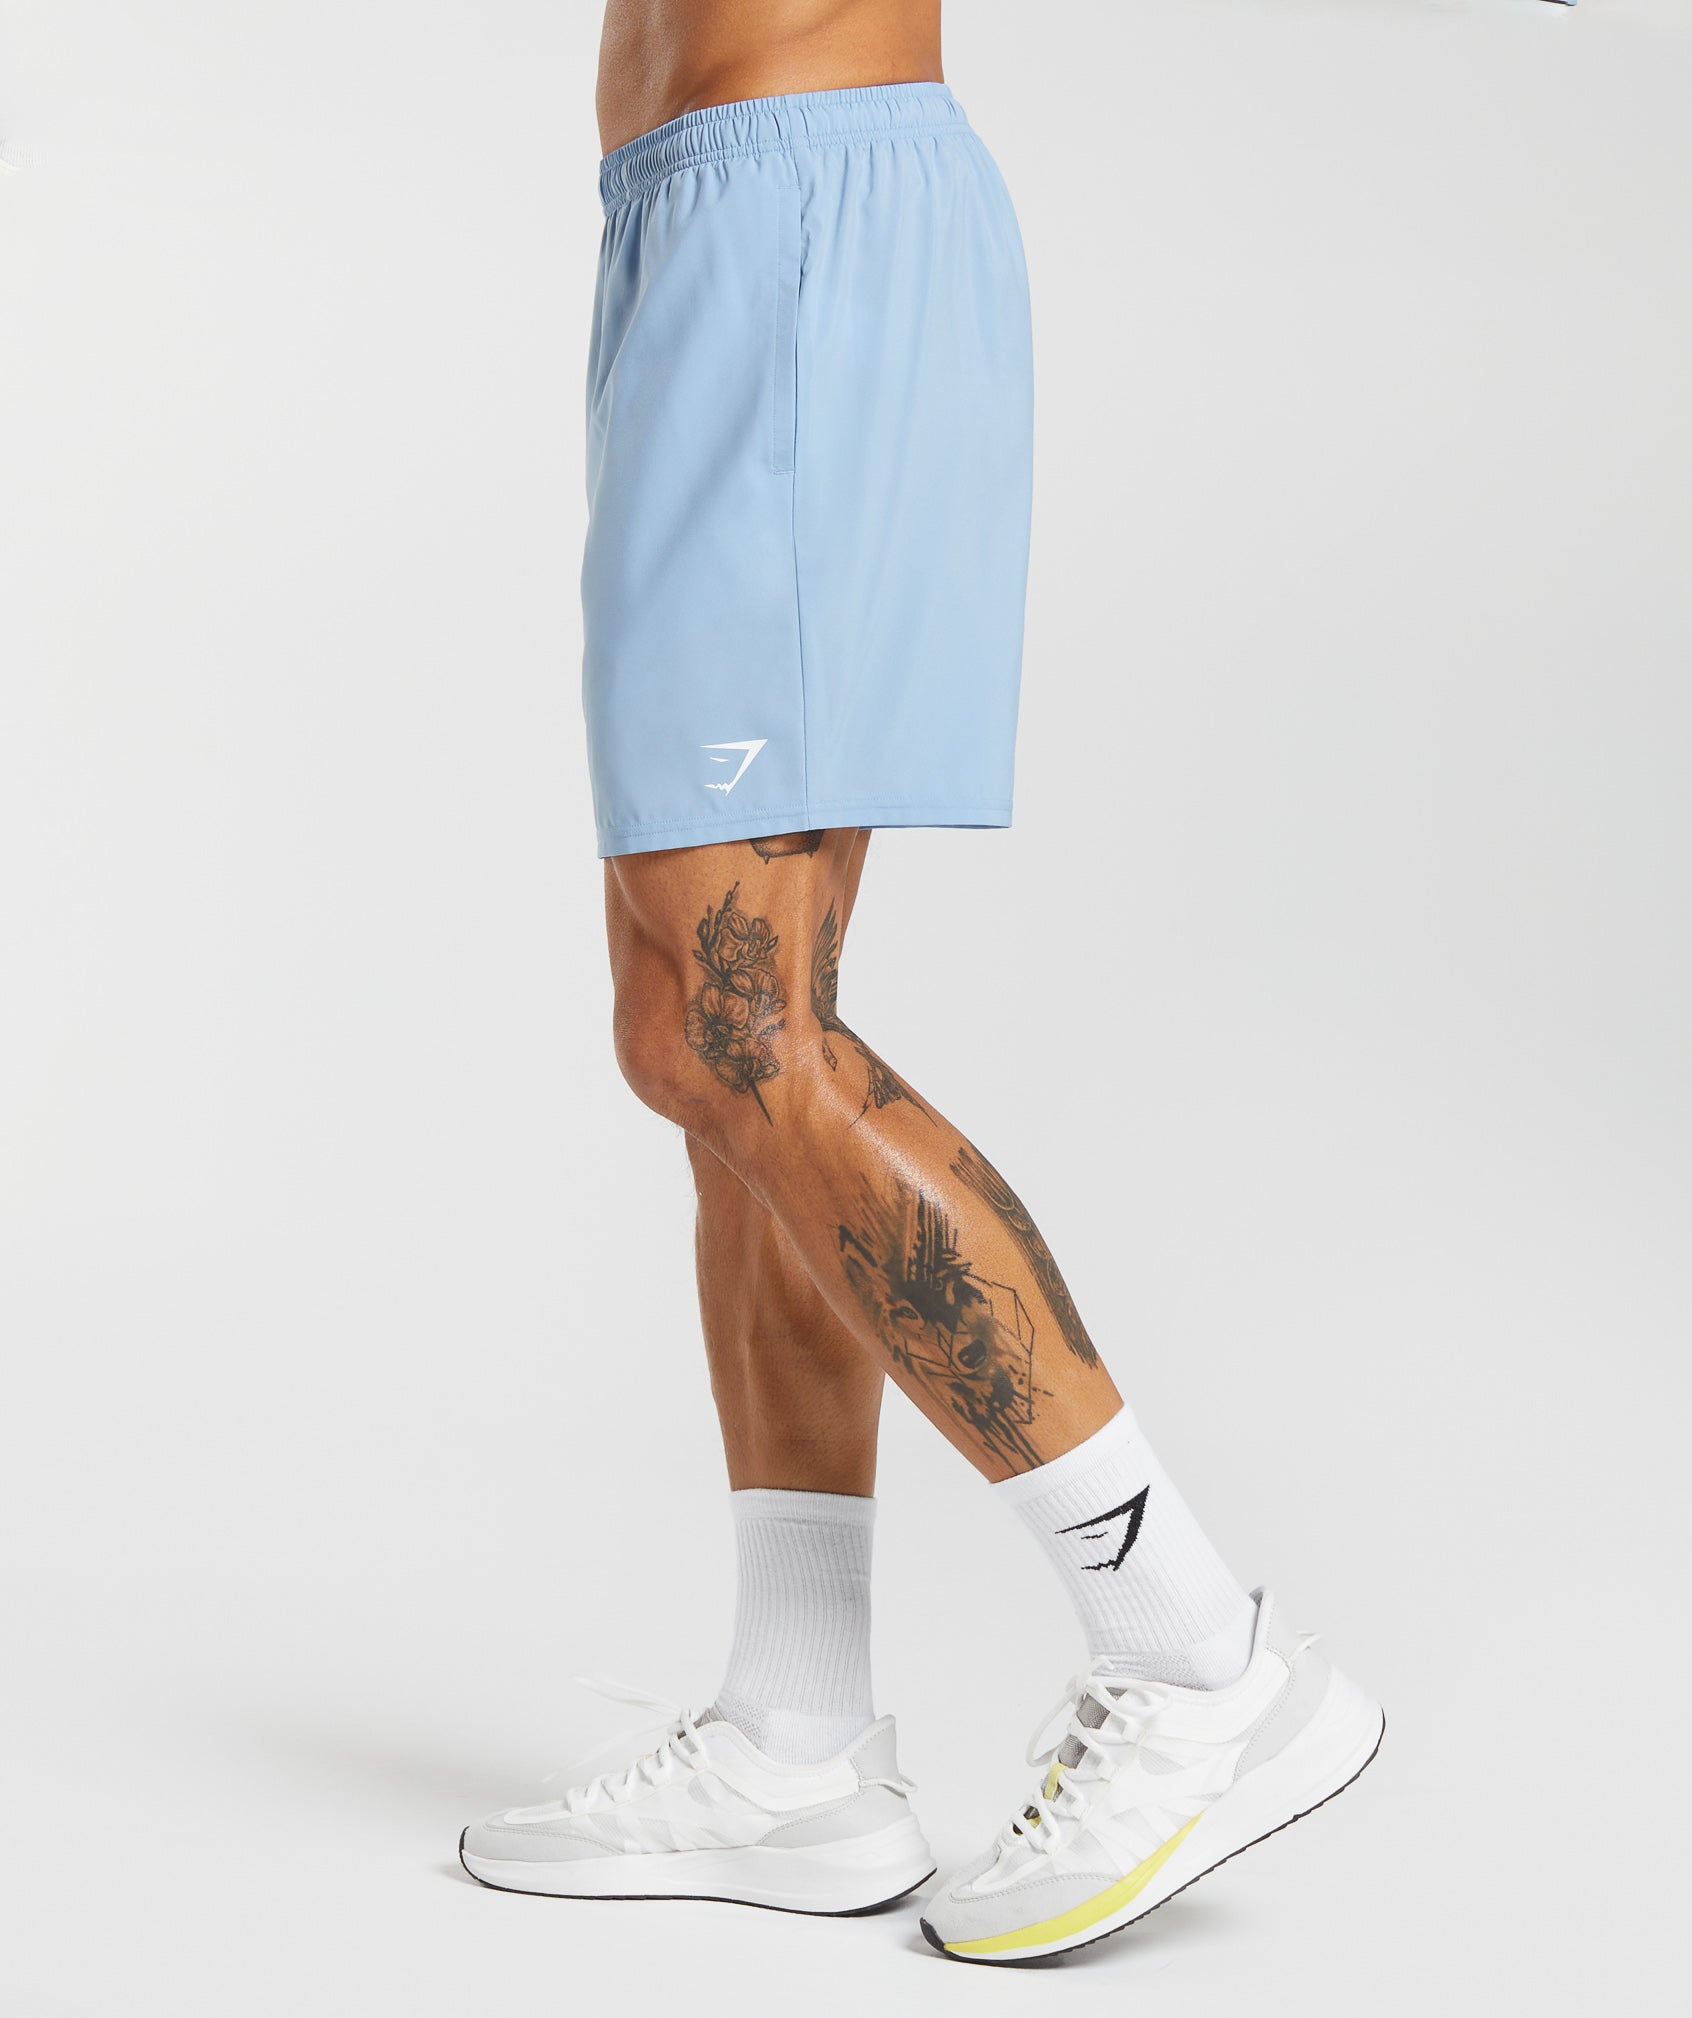 Arrival 7" Shorts in Ozone Blue - view 3